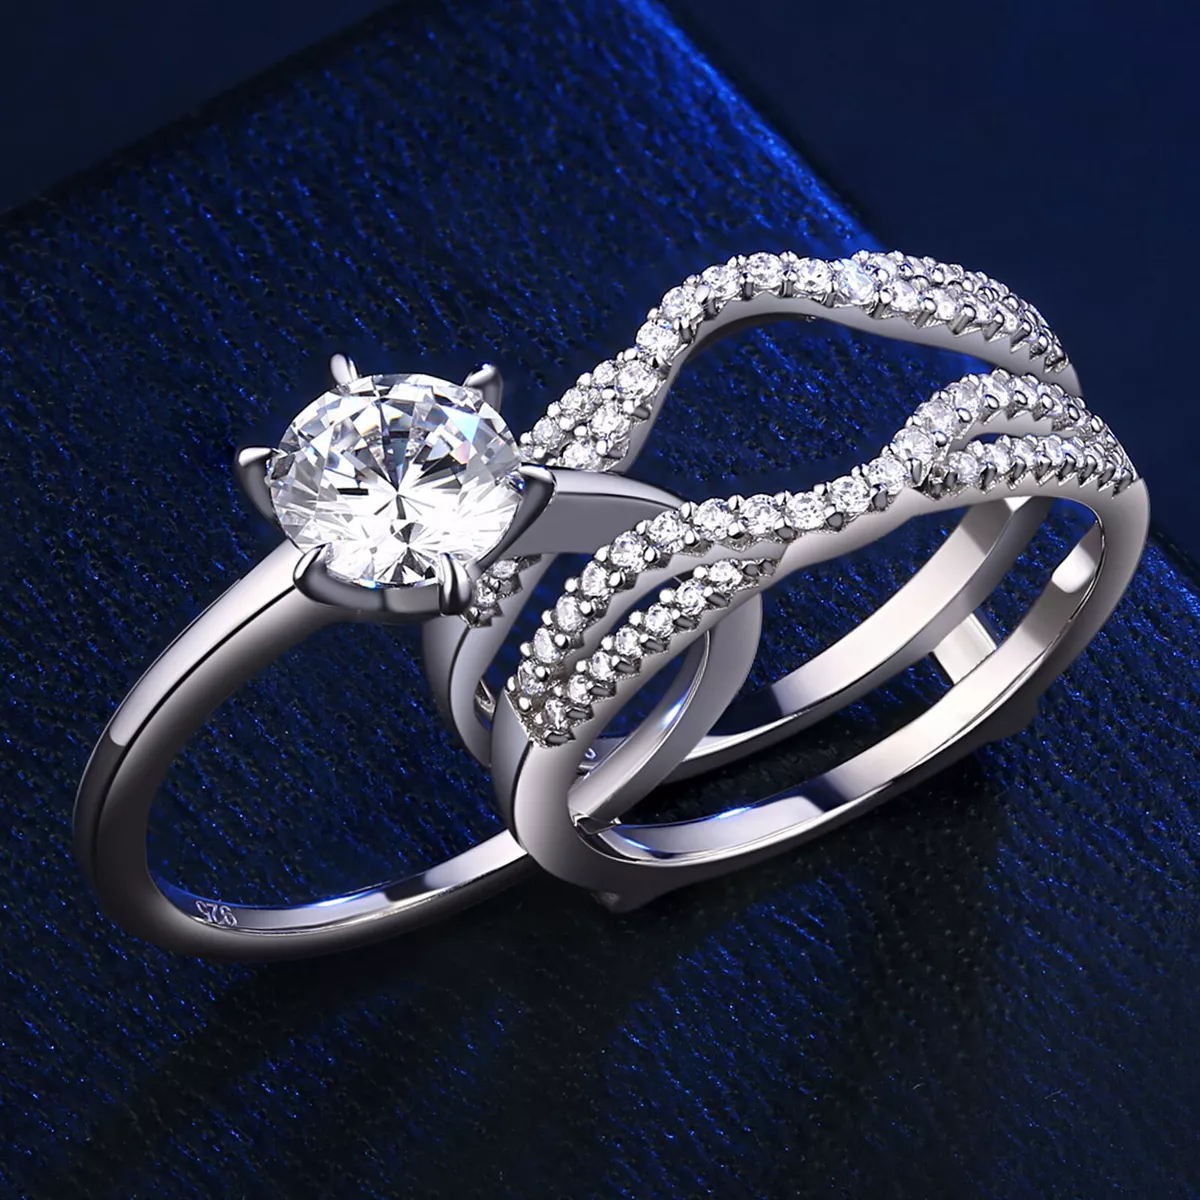 Ring With Side Stones Jewelry 925 Sterling Silver Wedding Engagement Ring  For Woman 38ct AAAAA CZ Simulated Diamond Heart Bridal Sets 230707 From  Huafei10, $27.43 | DHgate.Com